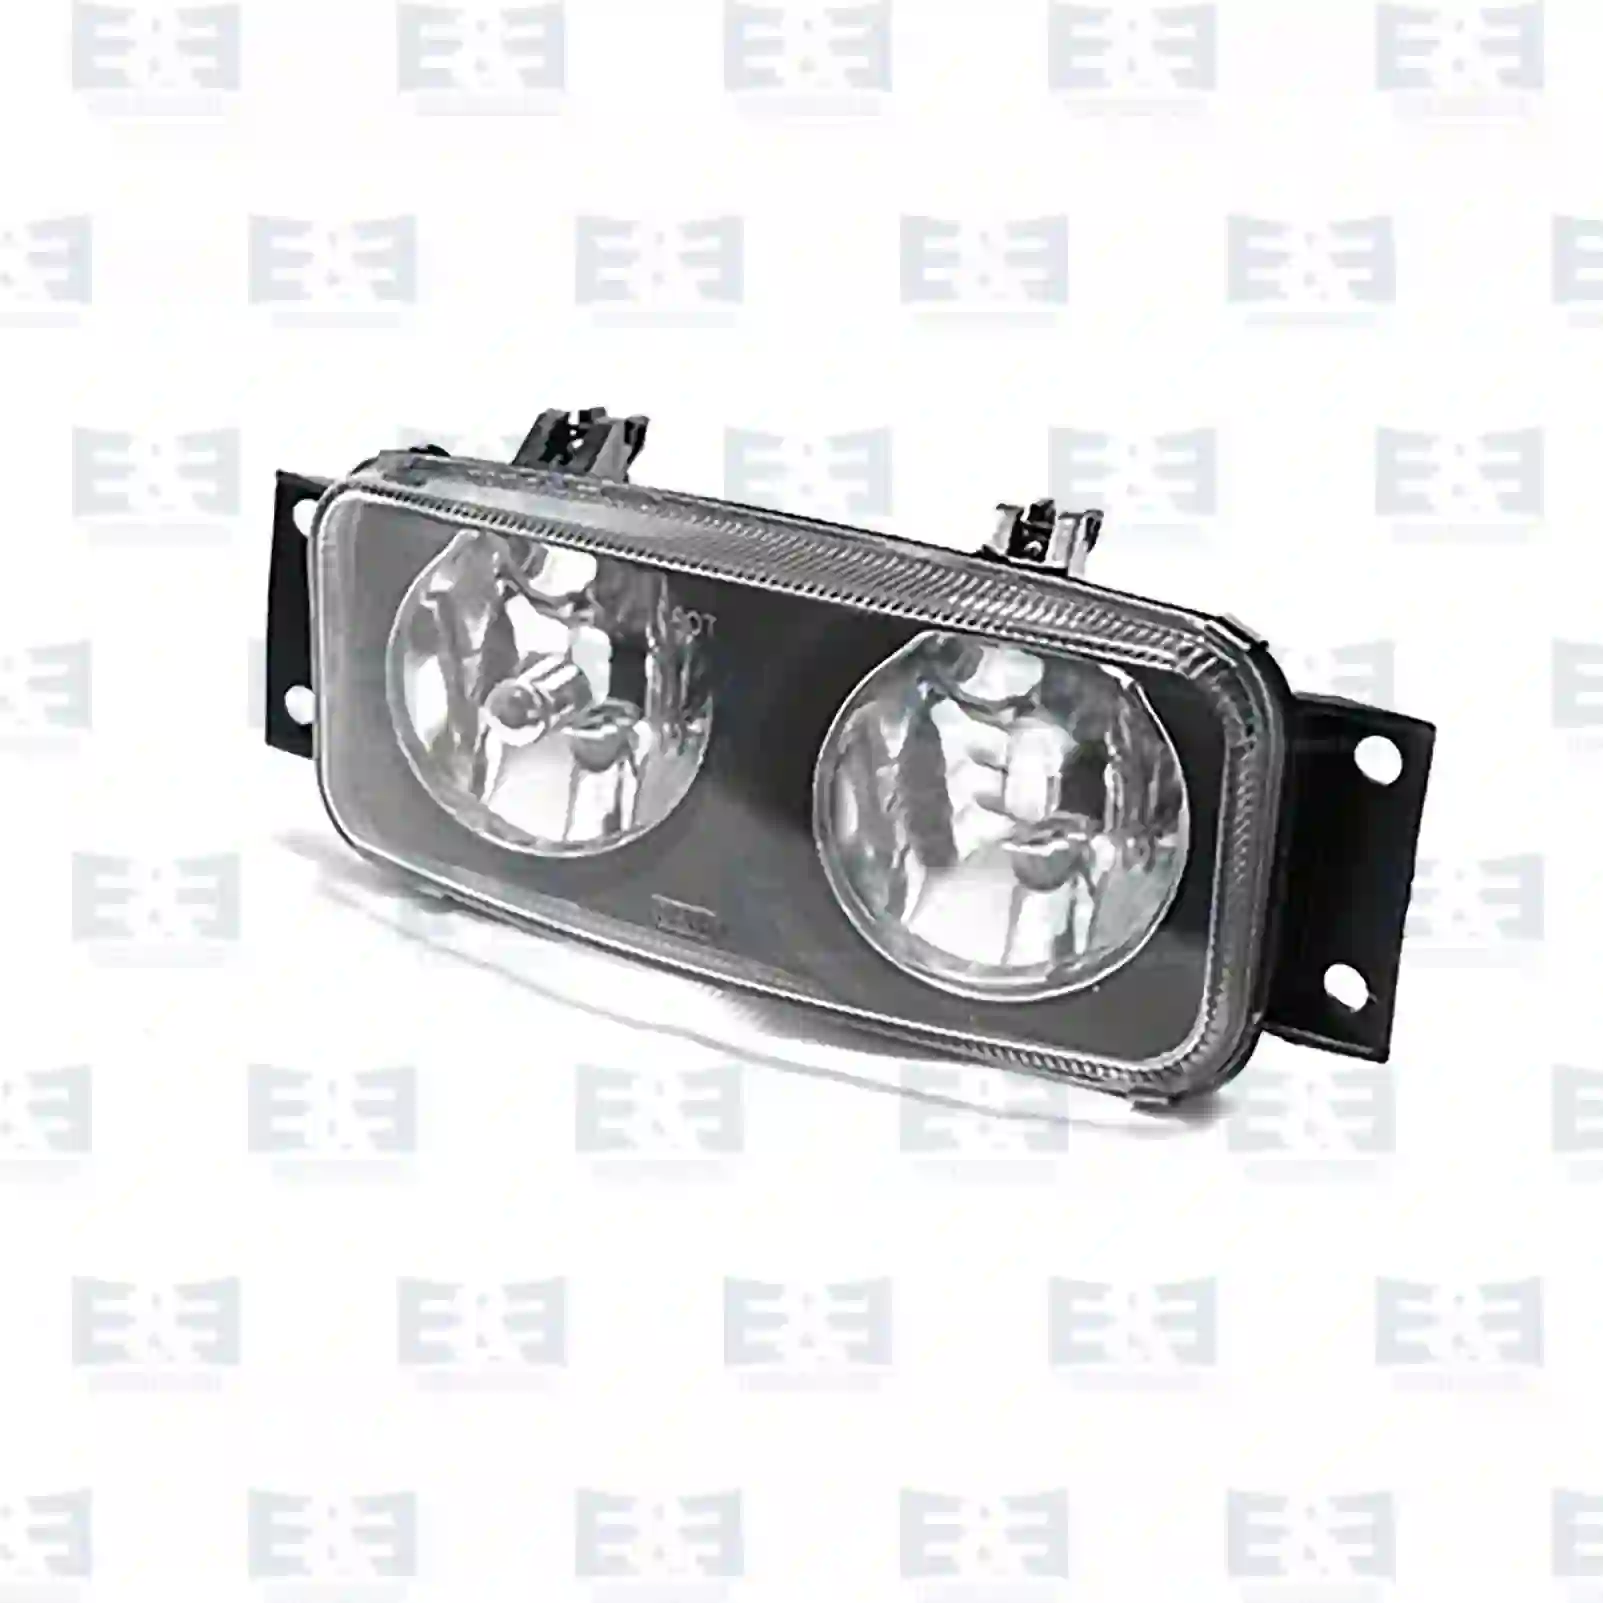 Auxiliary lamp, right, without bulb, 2E2290201, 1358832, 1400208, 1422992, 1529071, 529071, ZG20264-0008 ||  2E2290201 E&E Truck Spare Parts | Truck Spare Parts, Auotomotive Spare Parts Auxiliary lamp, right, without bulb, 2E2290201, 1358832, 1400208, 1422992, 1529071, 529071, ZG20264-0008 ||  2E2290201 E&E Truck Spare Parts | Truck Spare Parts, Auotomotive Spare Parts